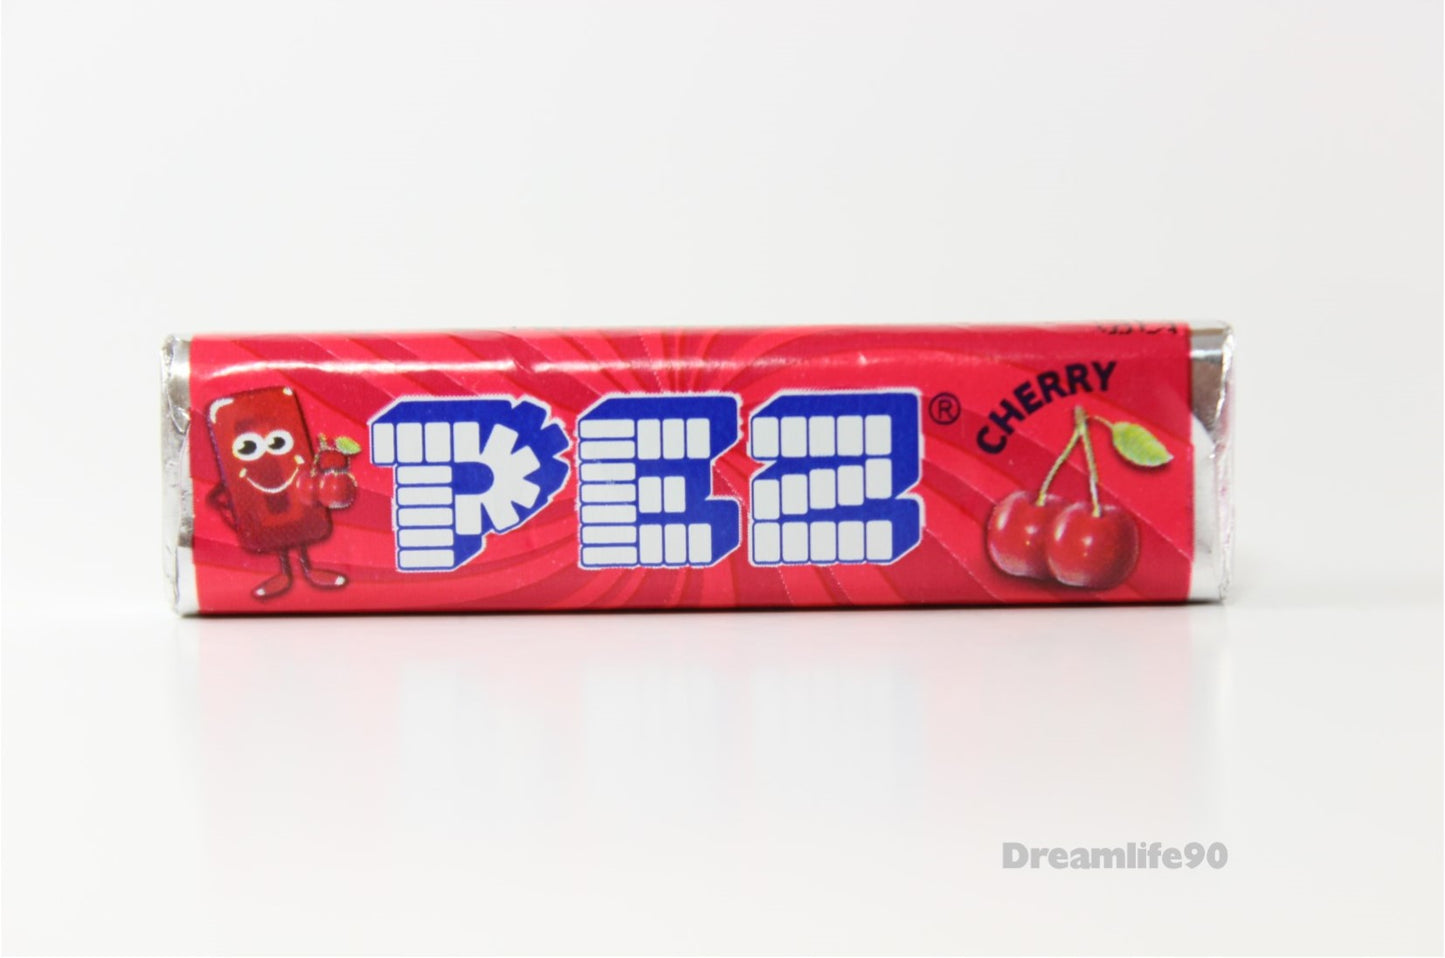 FRESH PEZ CANDY BY THE POUND - CHOOSE YOUR FLAVOR! - $14.99 PER POUND! - NO INTERNATIONAL BUYERS, PLEASE.